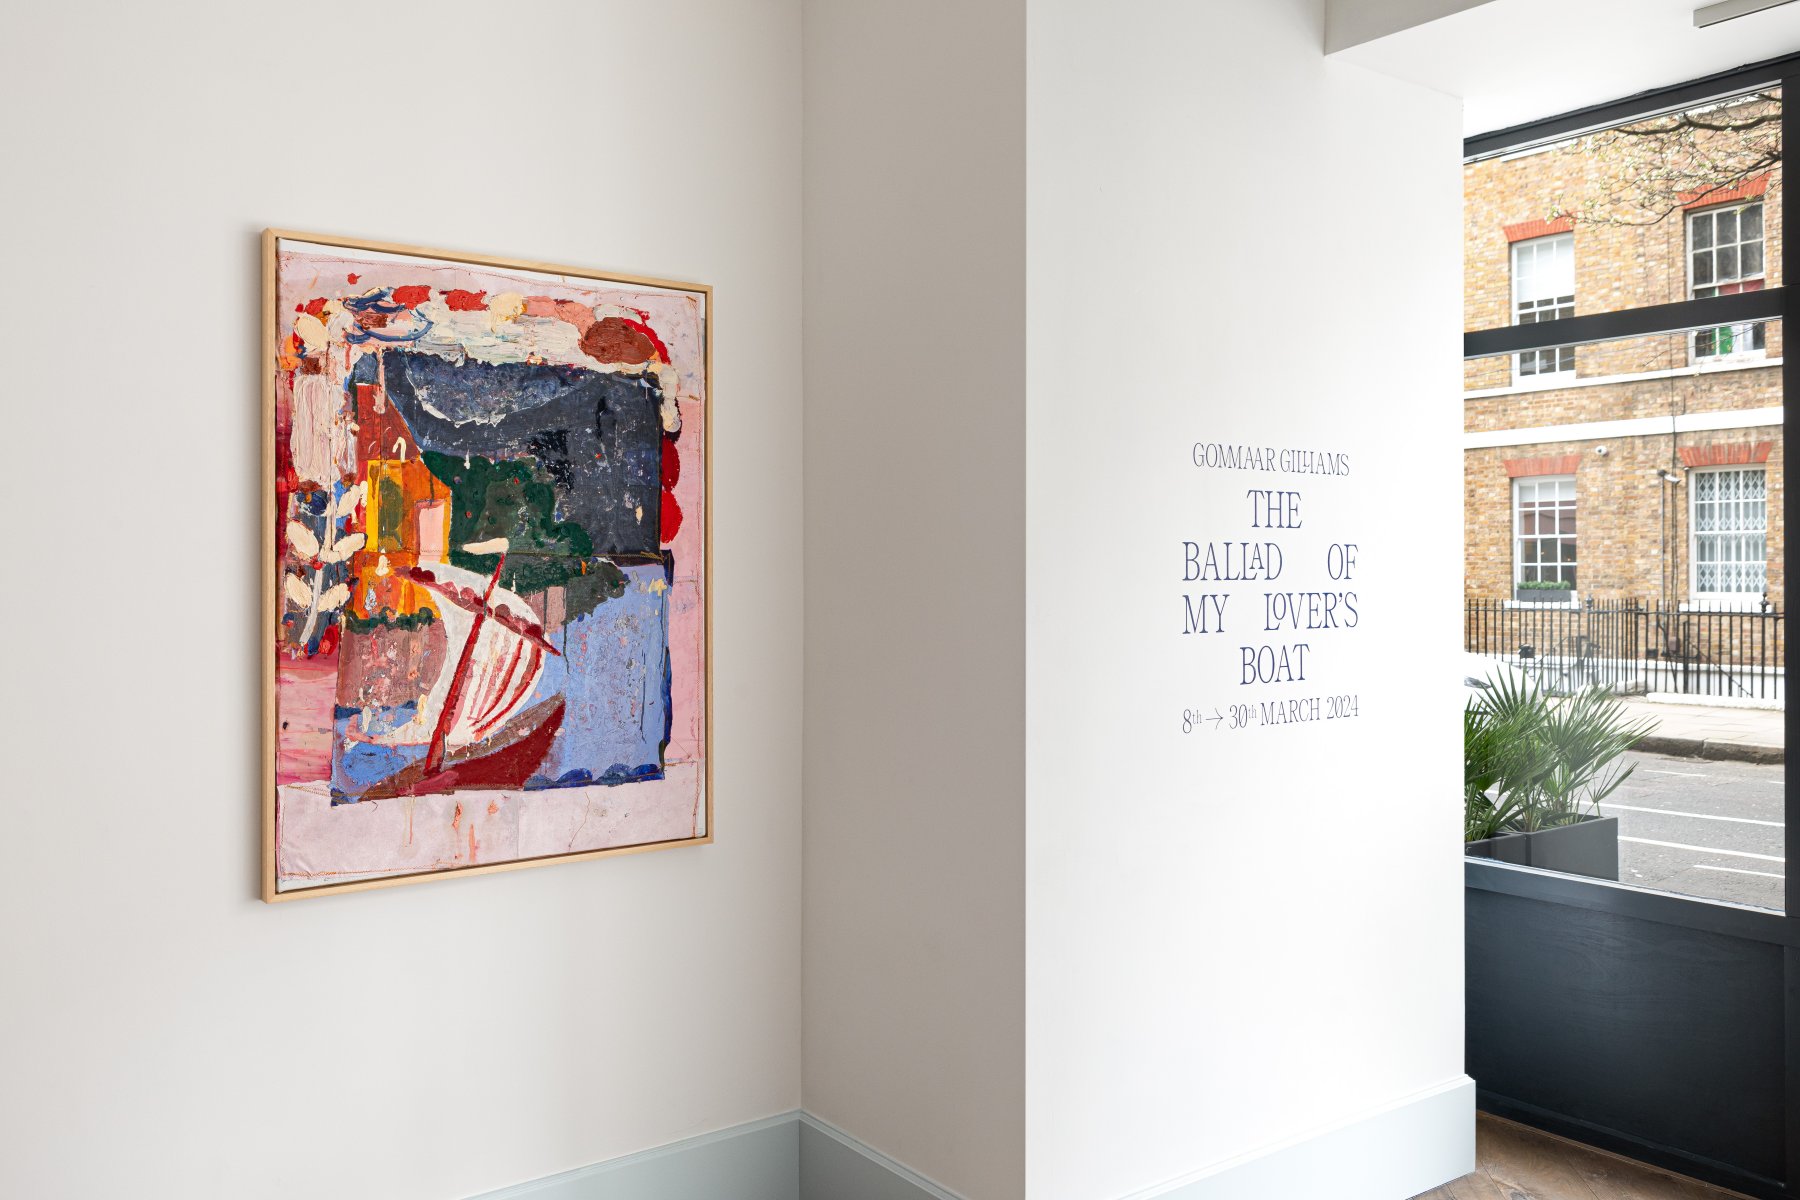 Installation image for Gommaar Gilliams: The Ballad of my Lover’s Boat, at Arusha Gallery